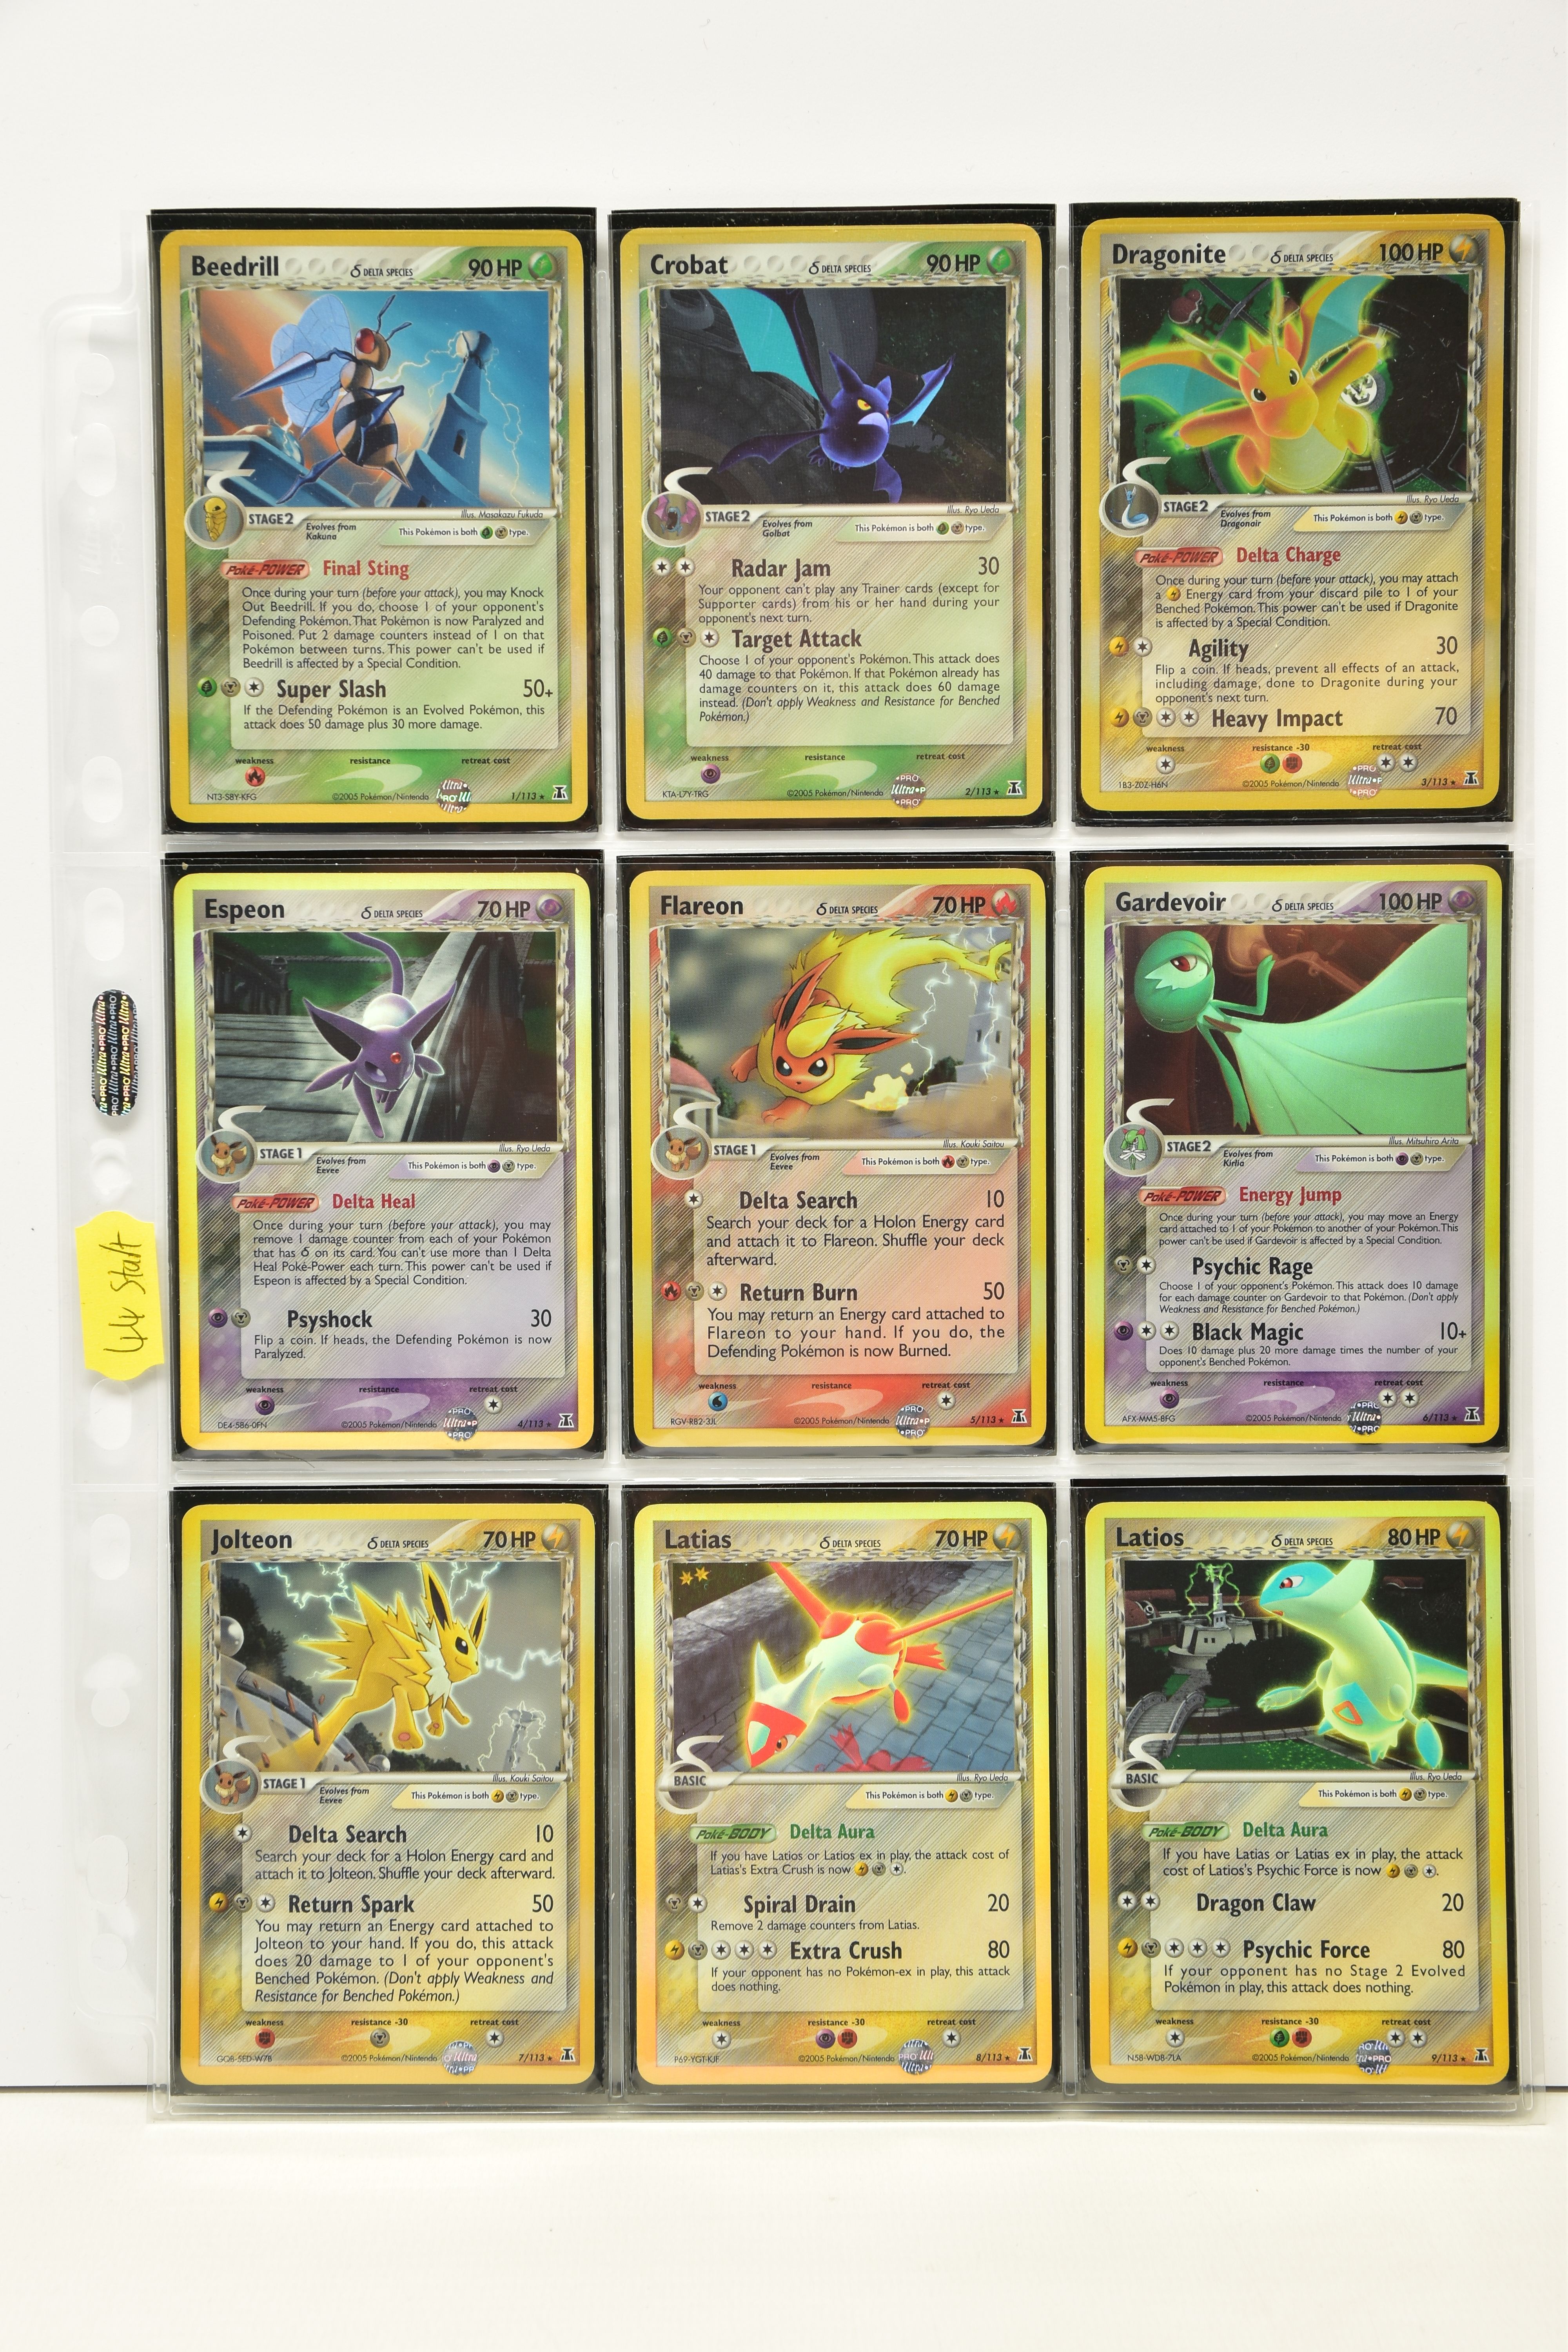 COMPLETE POKEMON EX DELTA SPECIES SET, all cards are present (including all gold star cards and